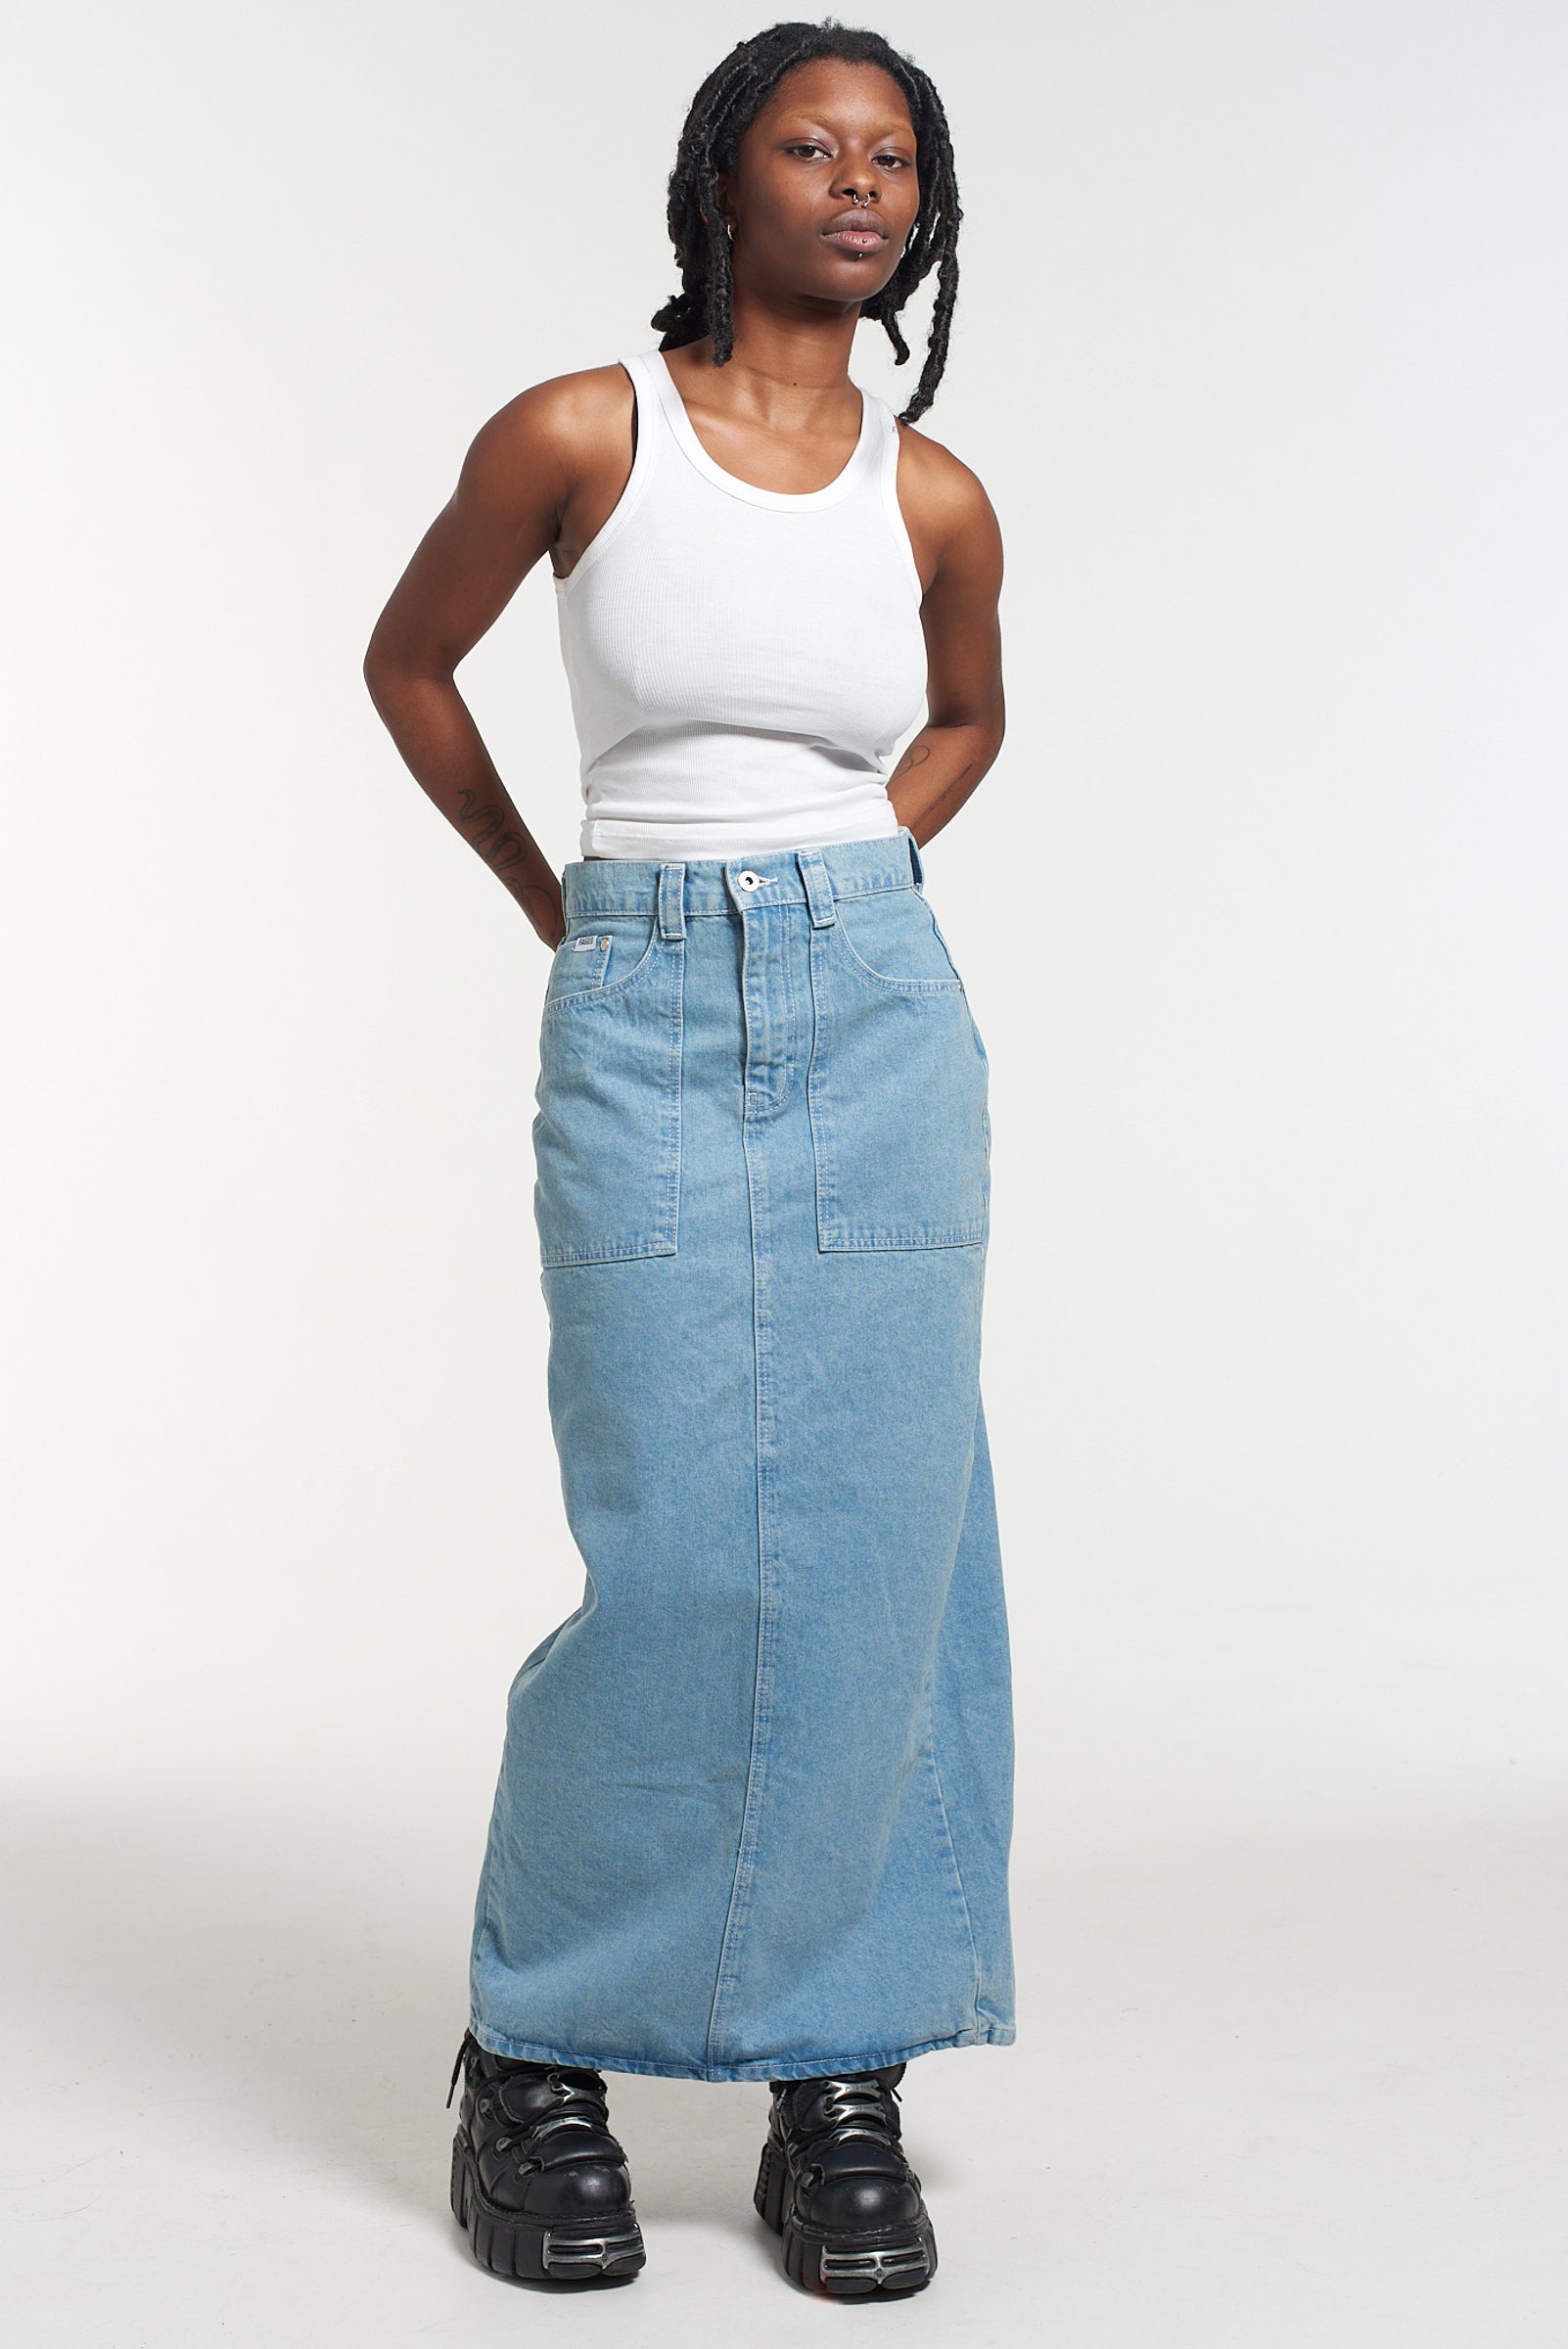 How To Wear Cotton Maxi Skirt | lupon.gov.ph